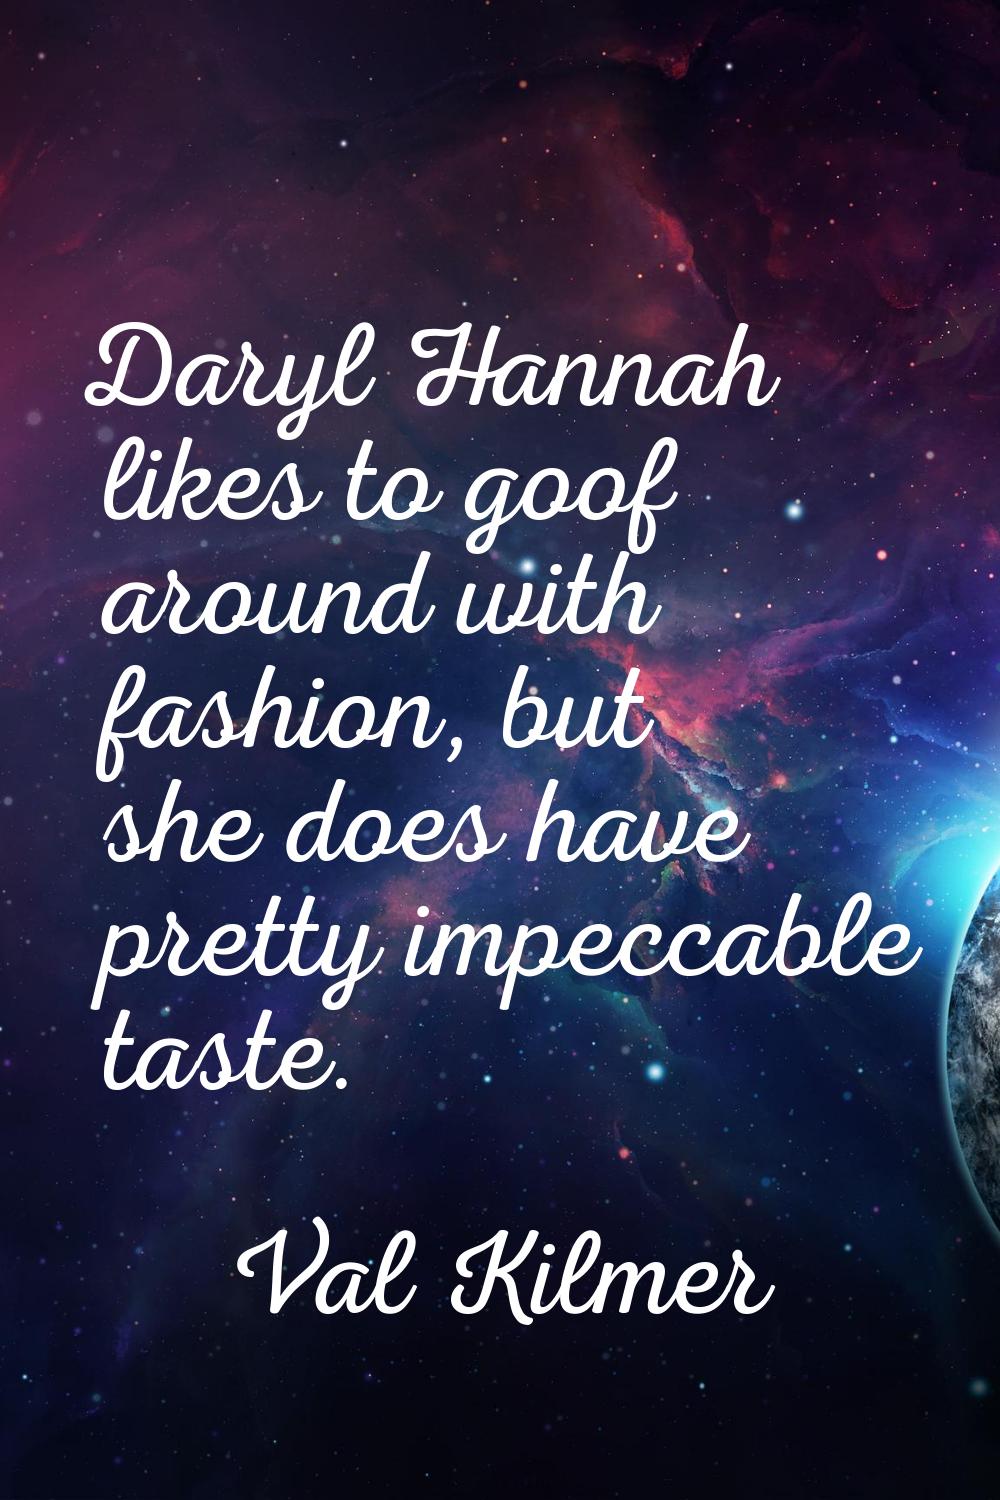 Daryl Hannah likes to goof around with fashion, but she does have pretty impeccable taste.